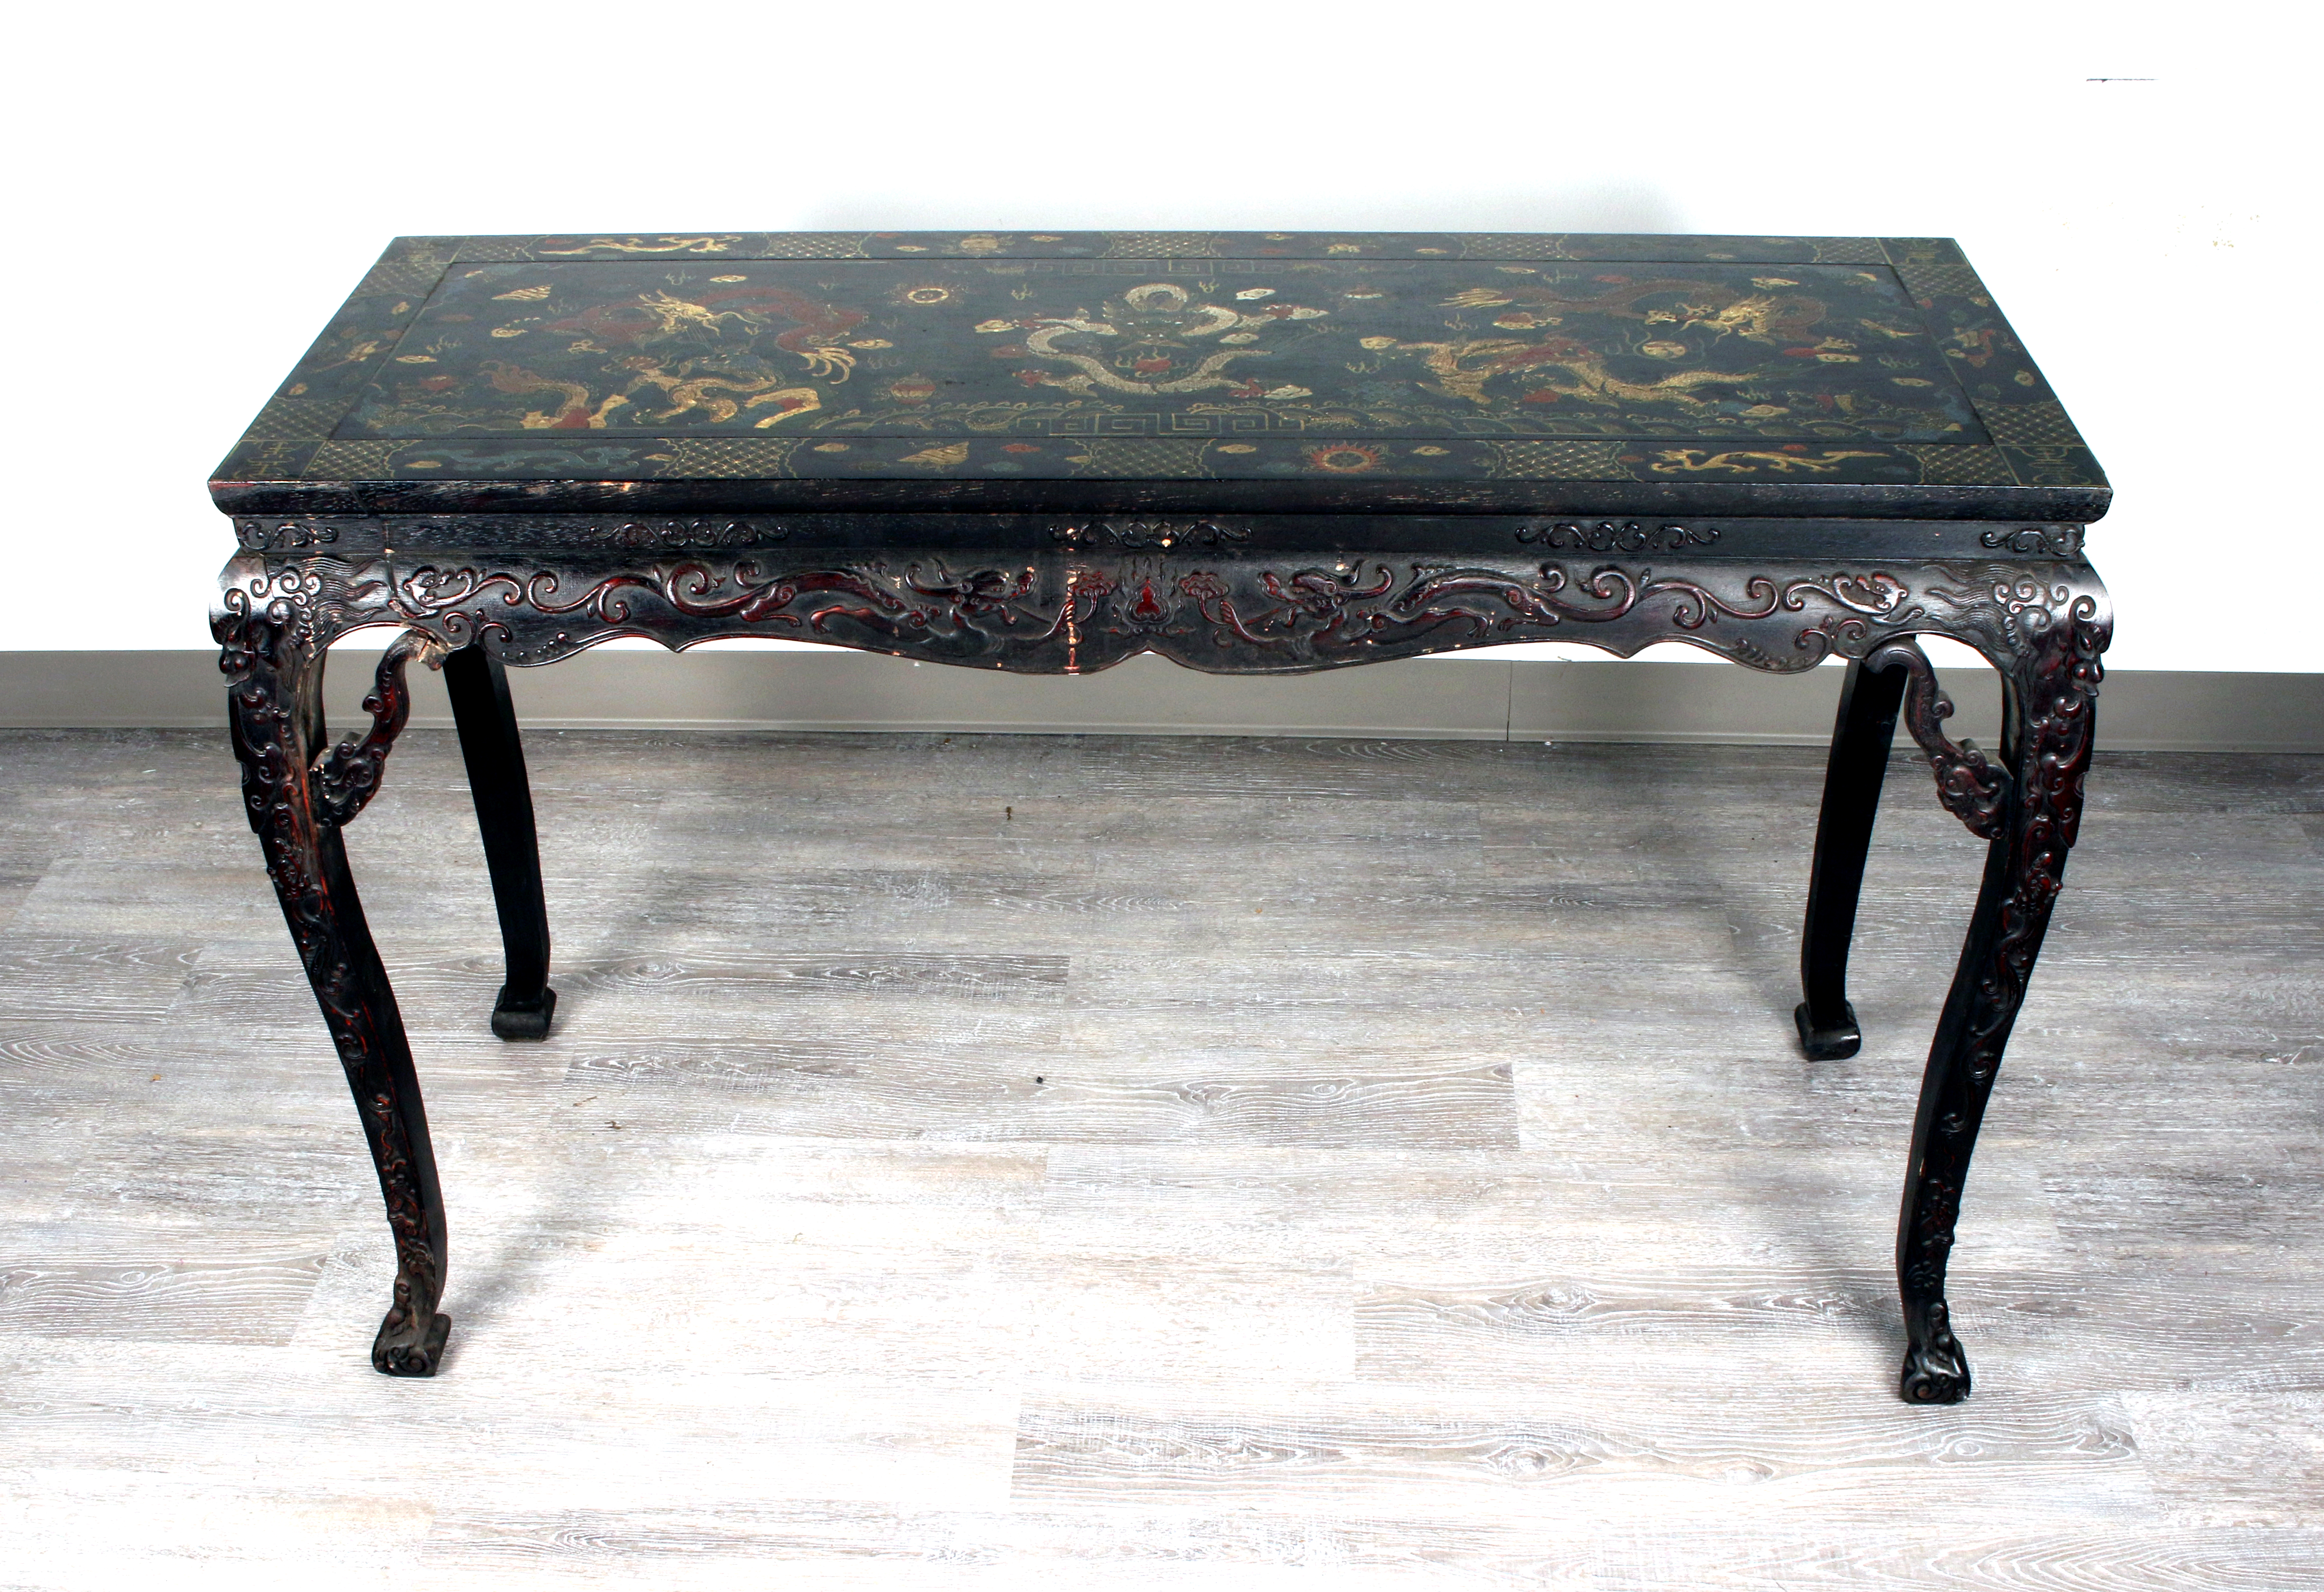 Vibrant Chinese Lacquer Table With Dragon Painting & Scholar Motifs image 1